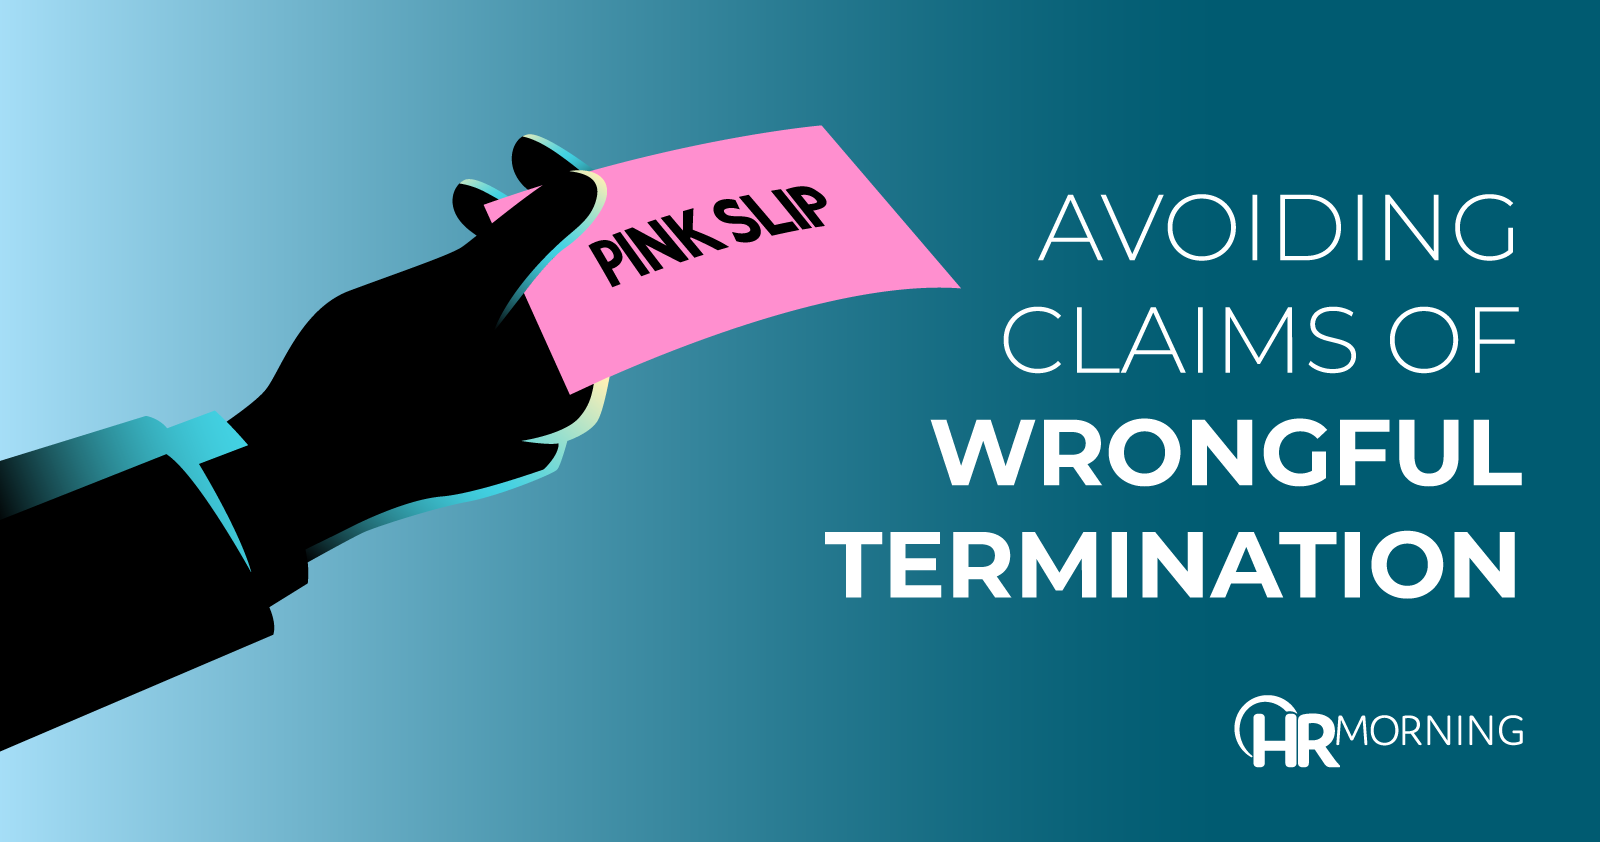 Avoiding claims of wrongful termination